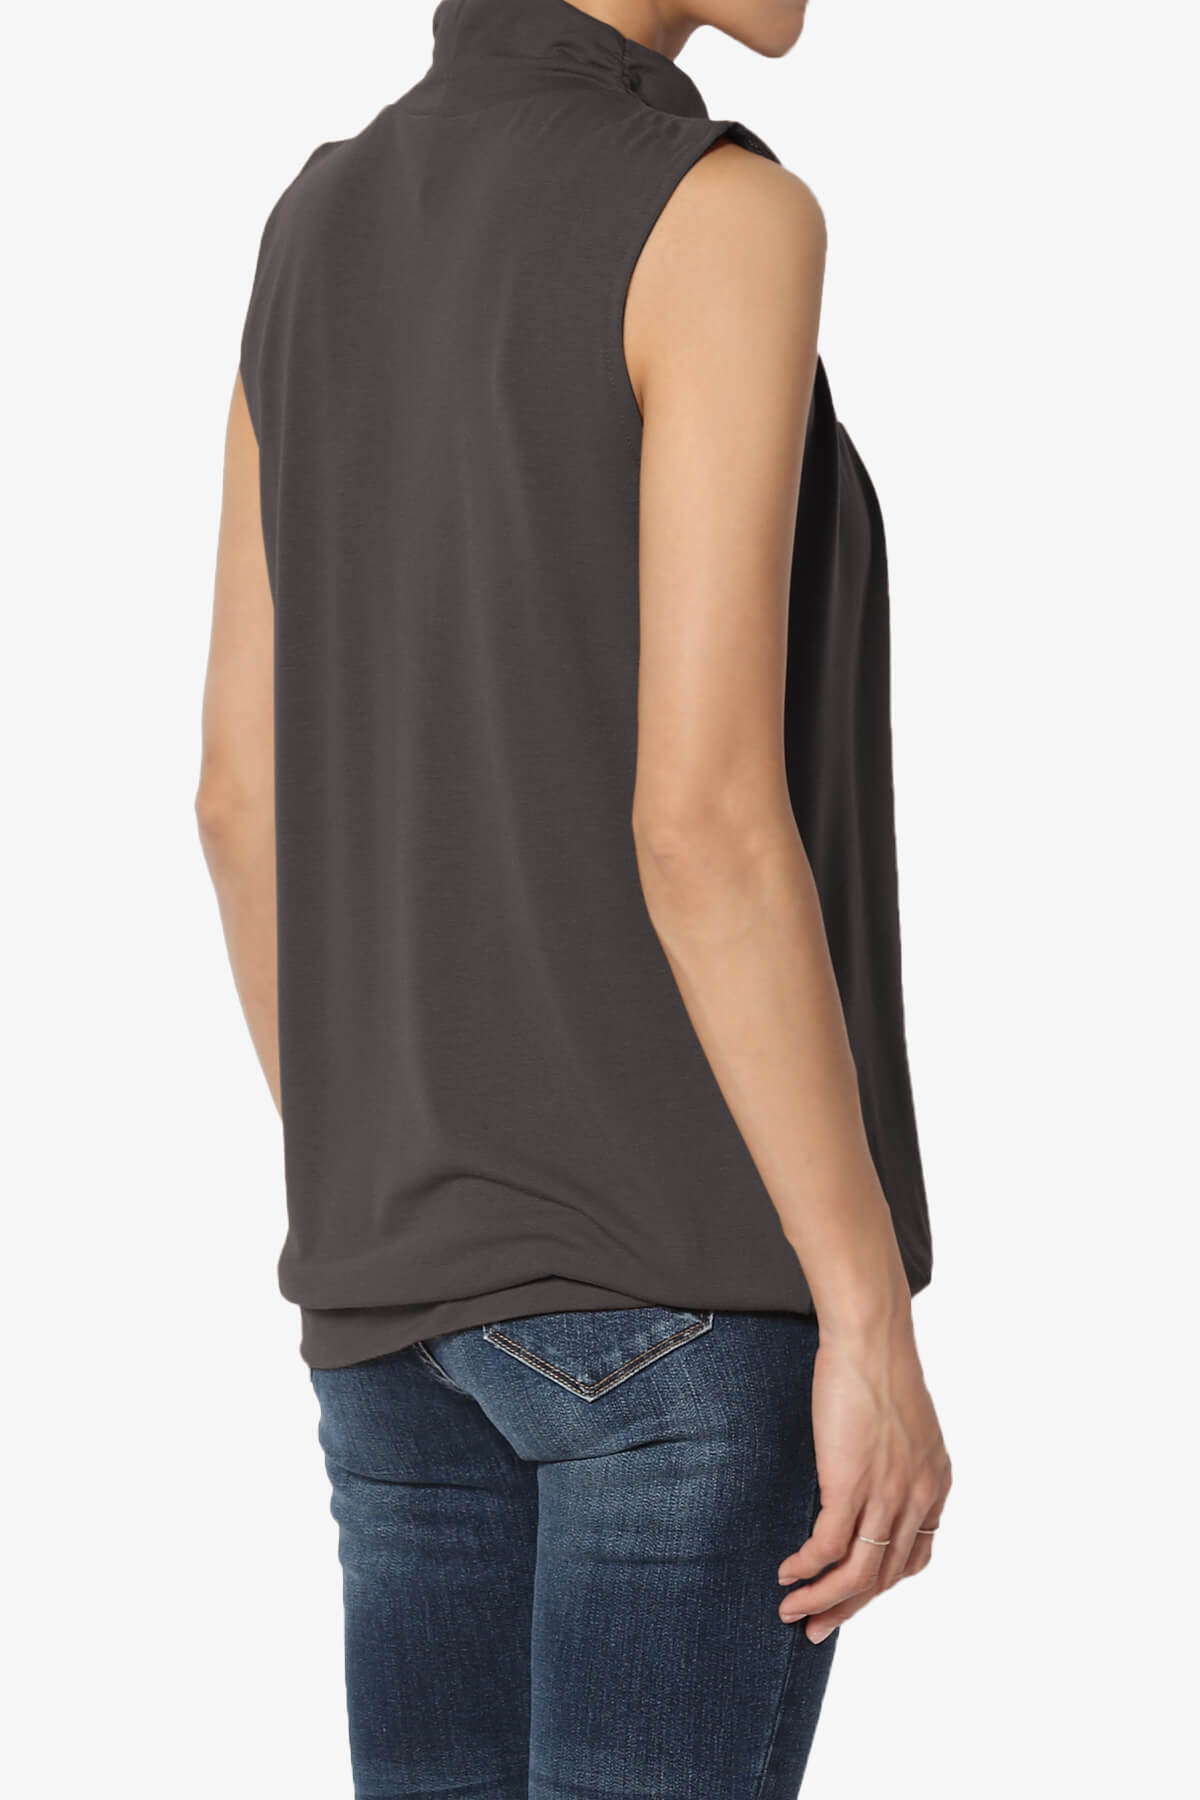 Load image into Gallery viewer, Jibbitz Sleeveless Mock Neck Pleated Top ASH GREY_4
